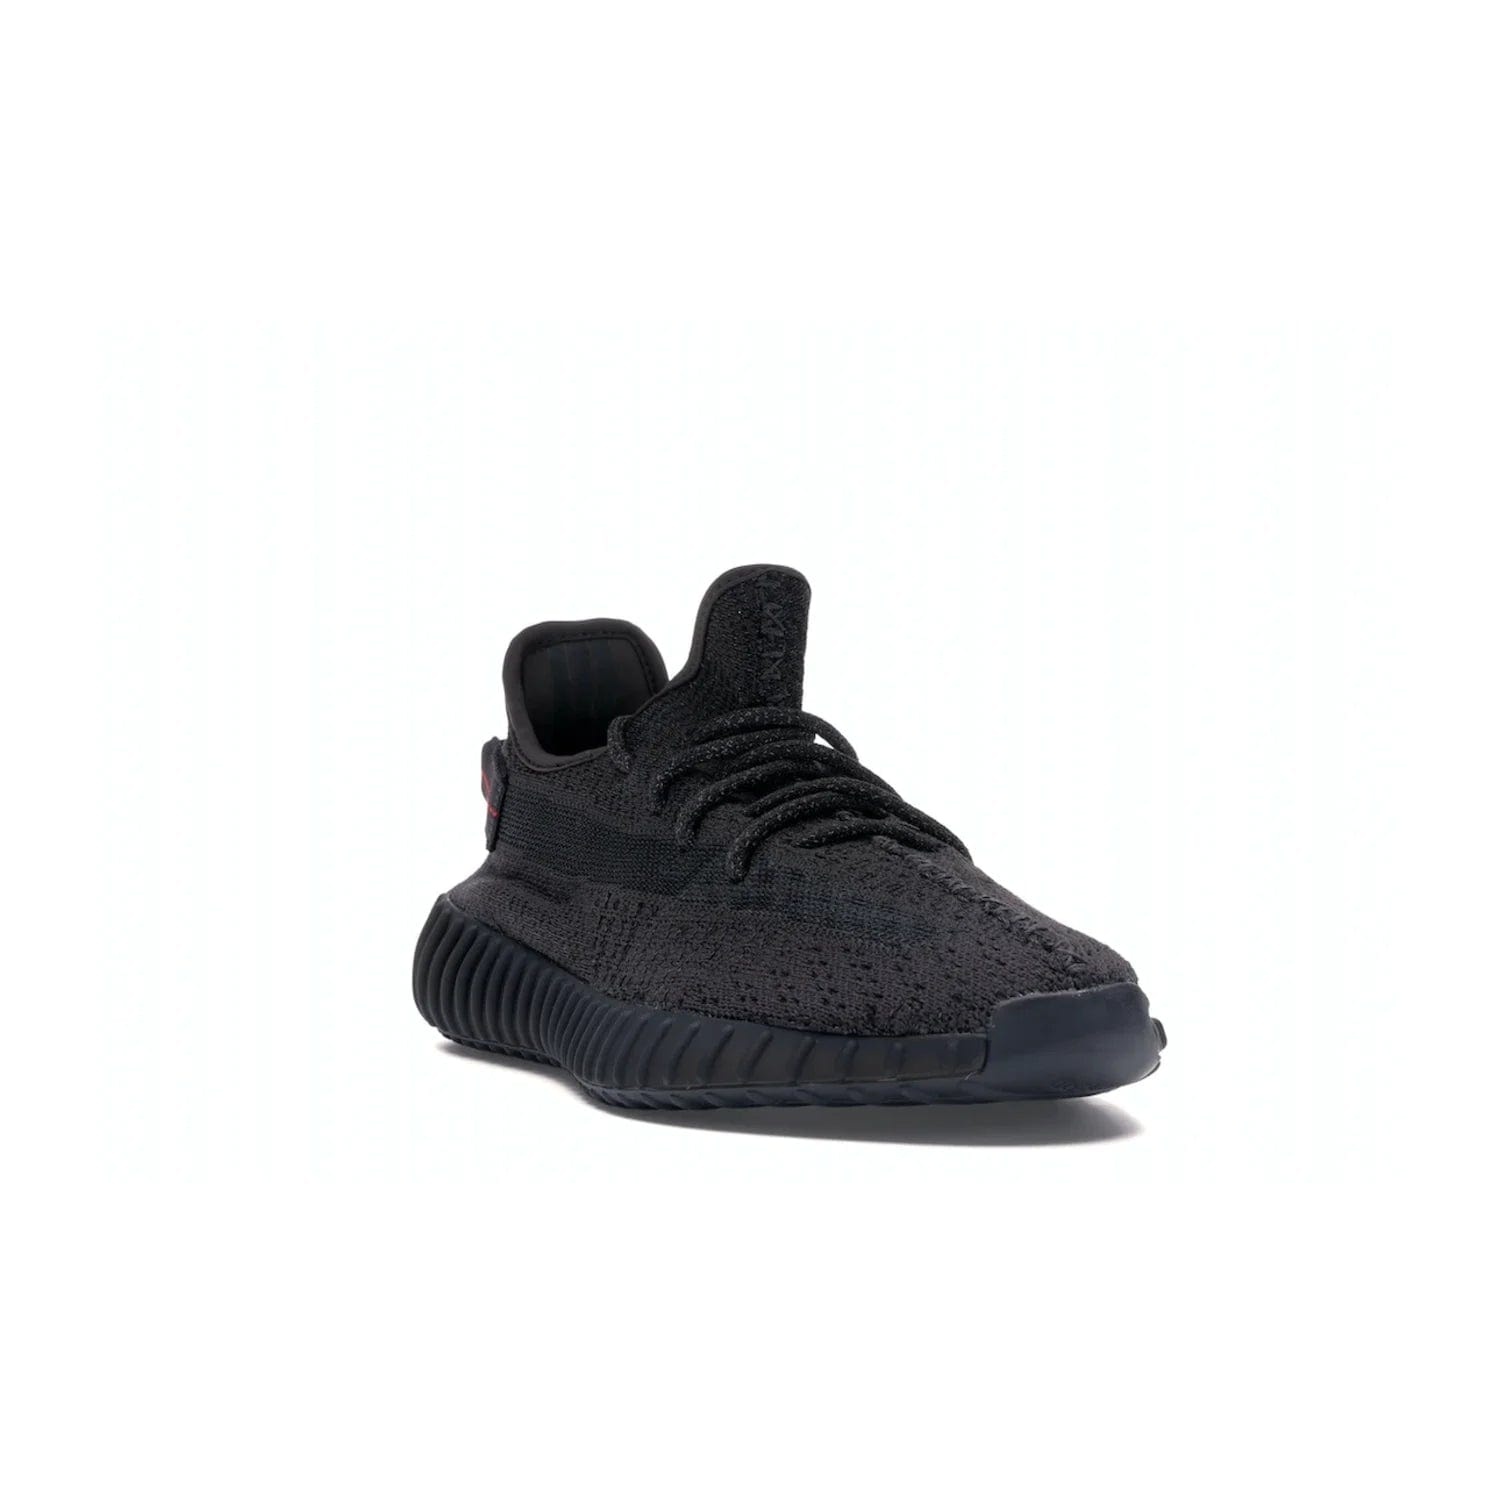 adidas Yeezy Boost 350 V2 Static Black (Reflective) - Image 7 - Only at www.BallersClubKickz.com - Make a statement with the adidas Yeezy Boost 350 V2 Static Black Reflective. All-black upper, reflective accents, midsole, and sole combine for a stylish look. High quality materials. June 2019 release. Add to your collection today.